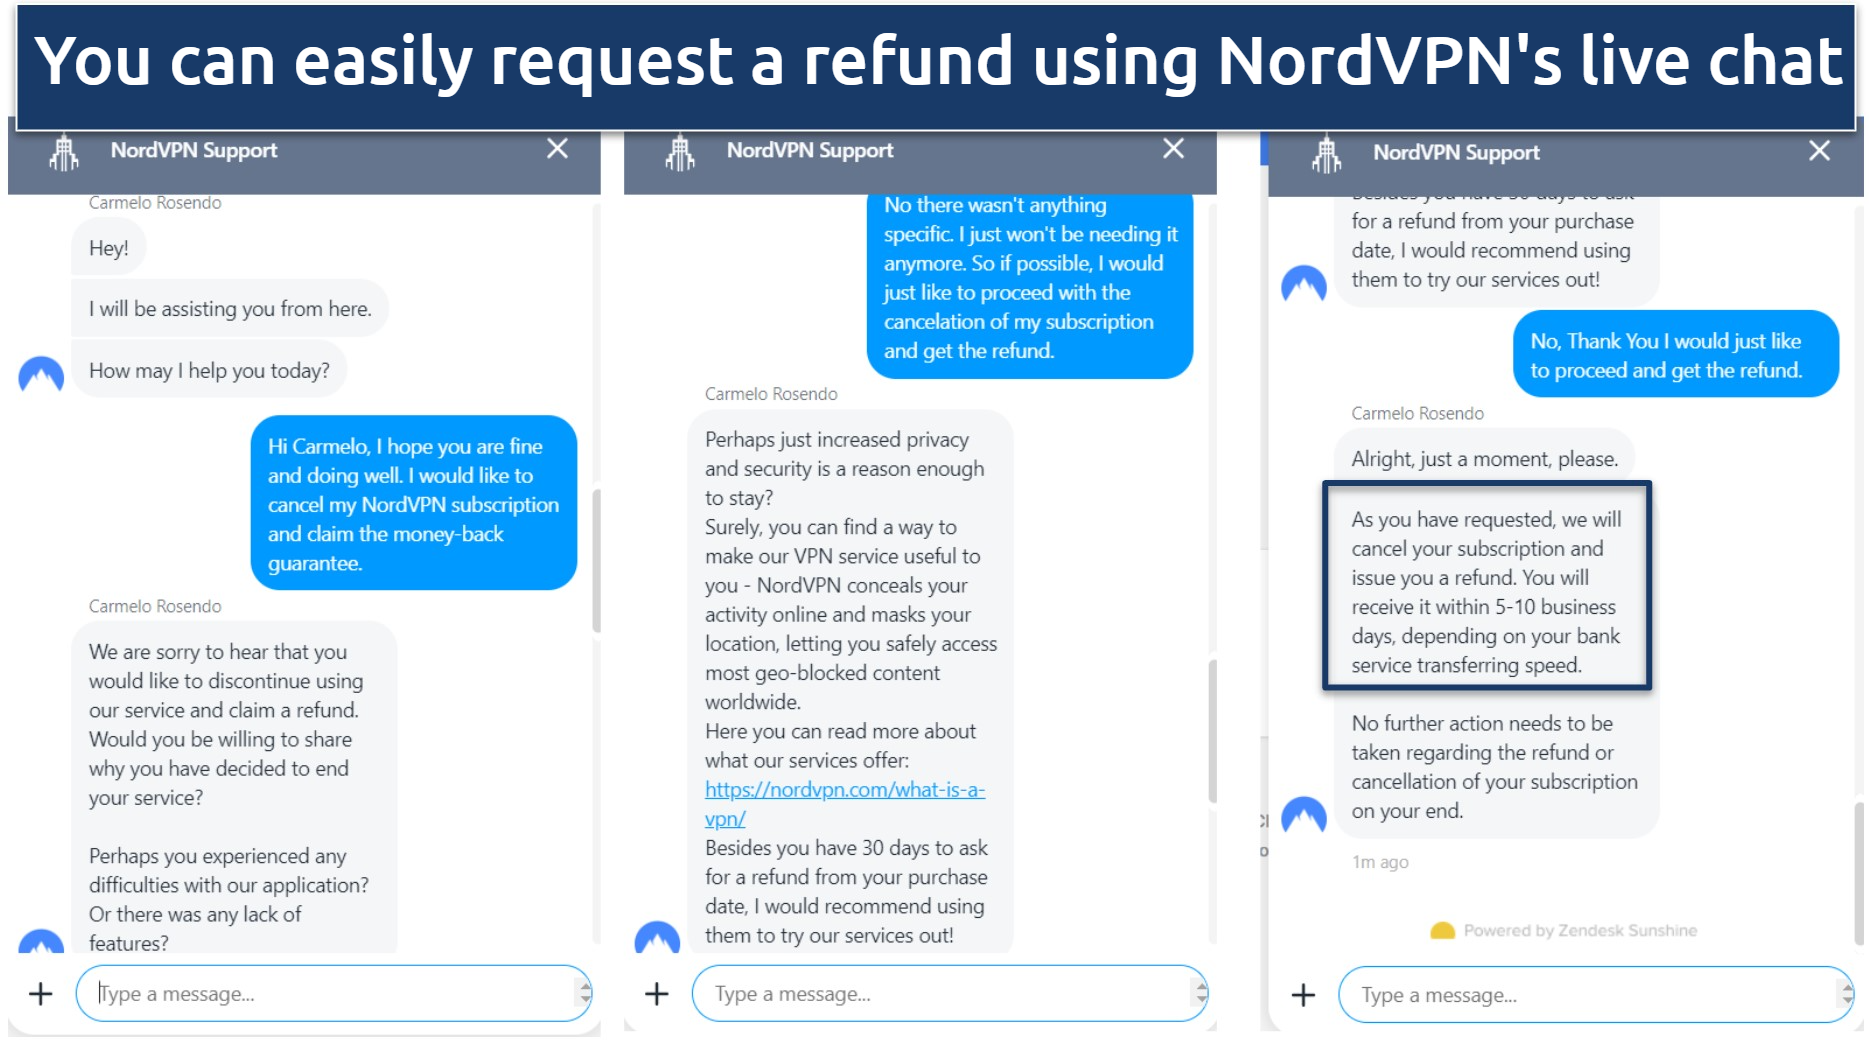 Image showing a live chat correspondence requesting and being approved for a NordVPN refund